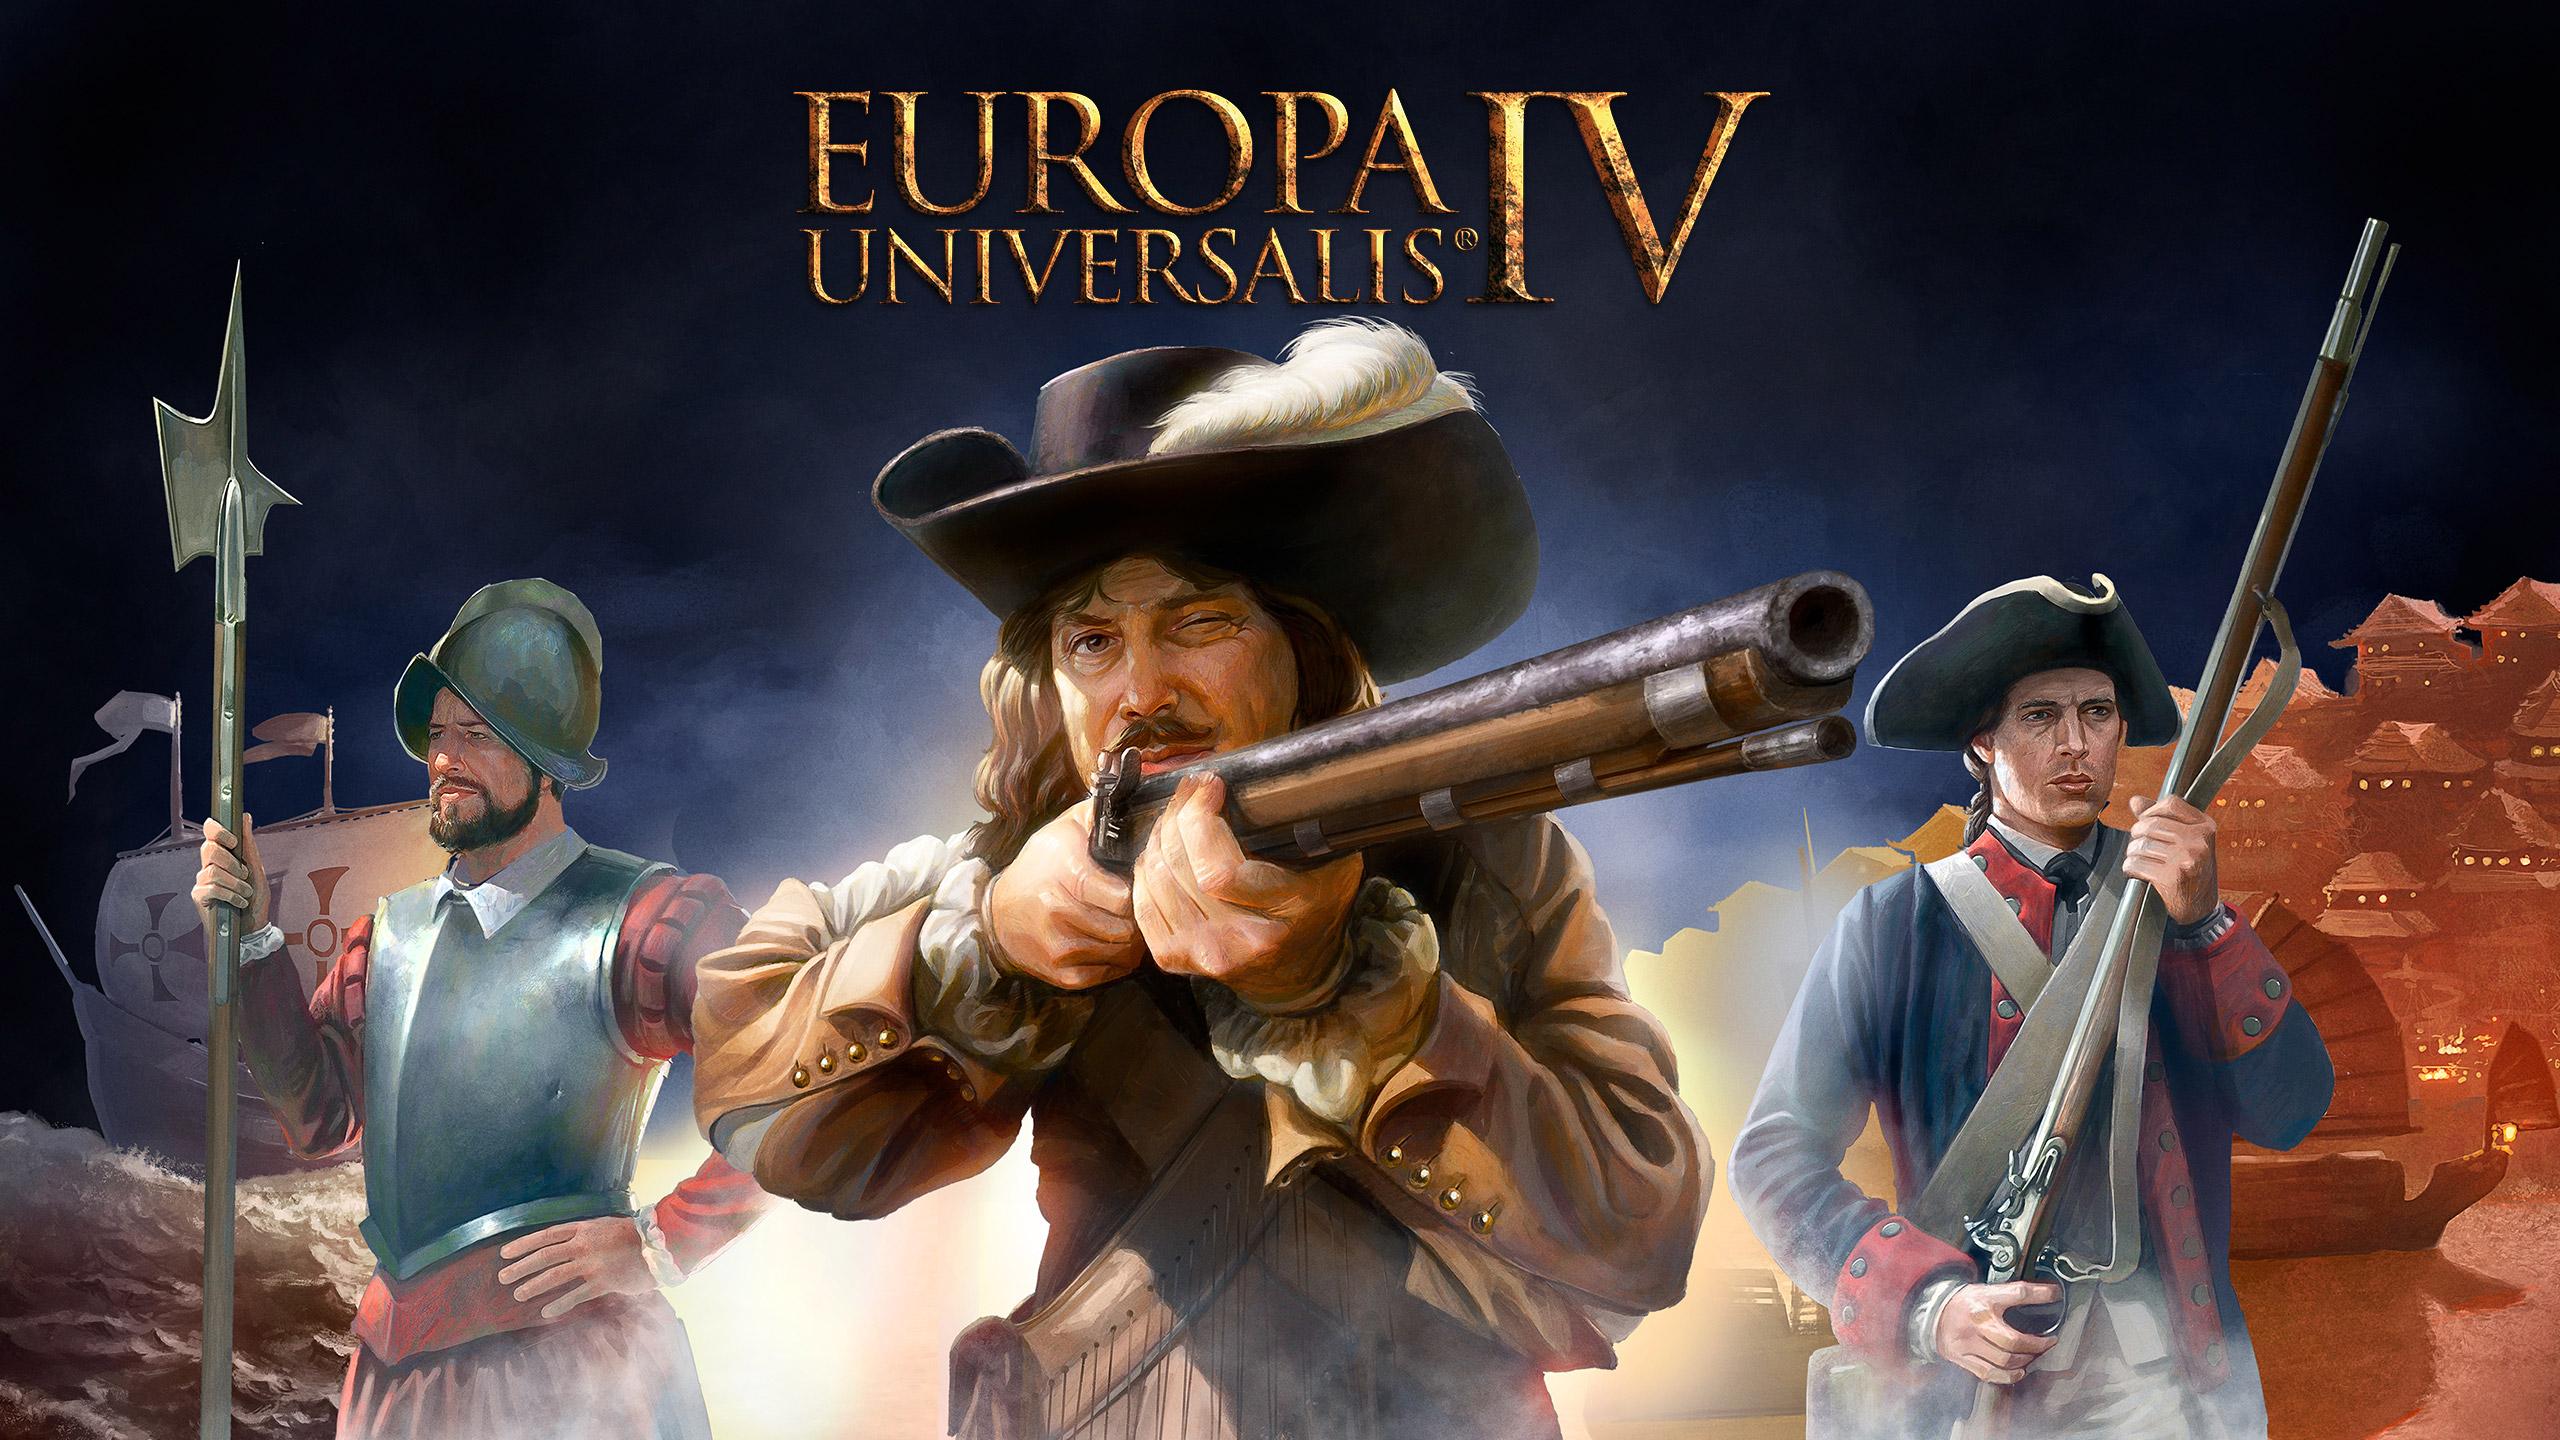 Europa Universalis IV PC Game Download for Free